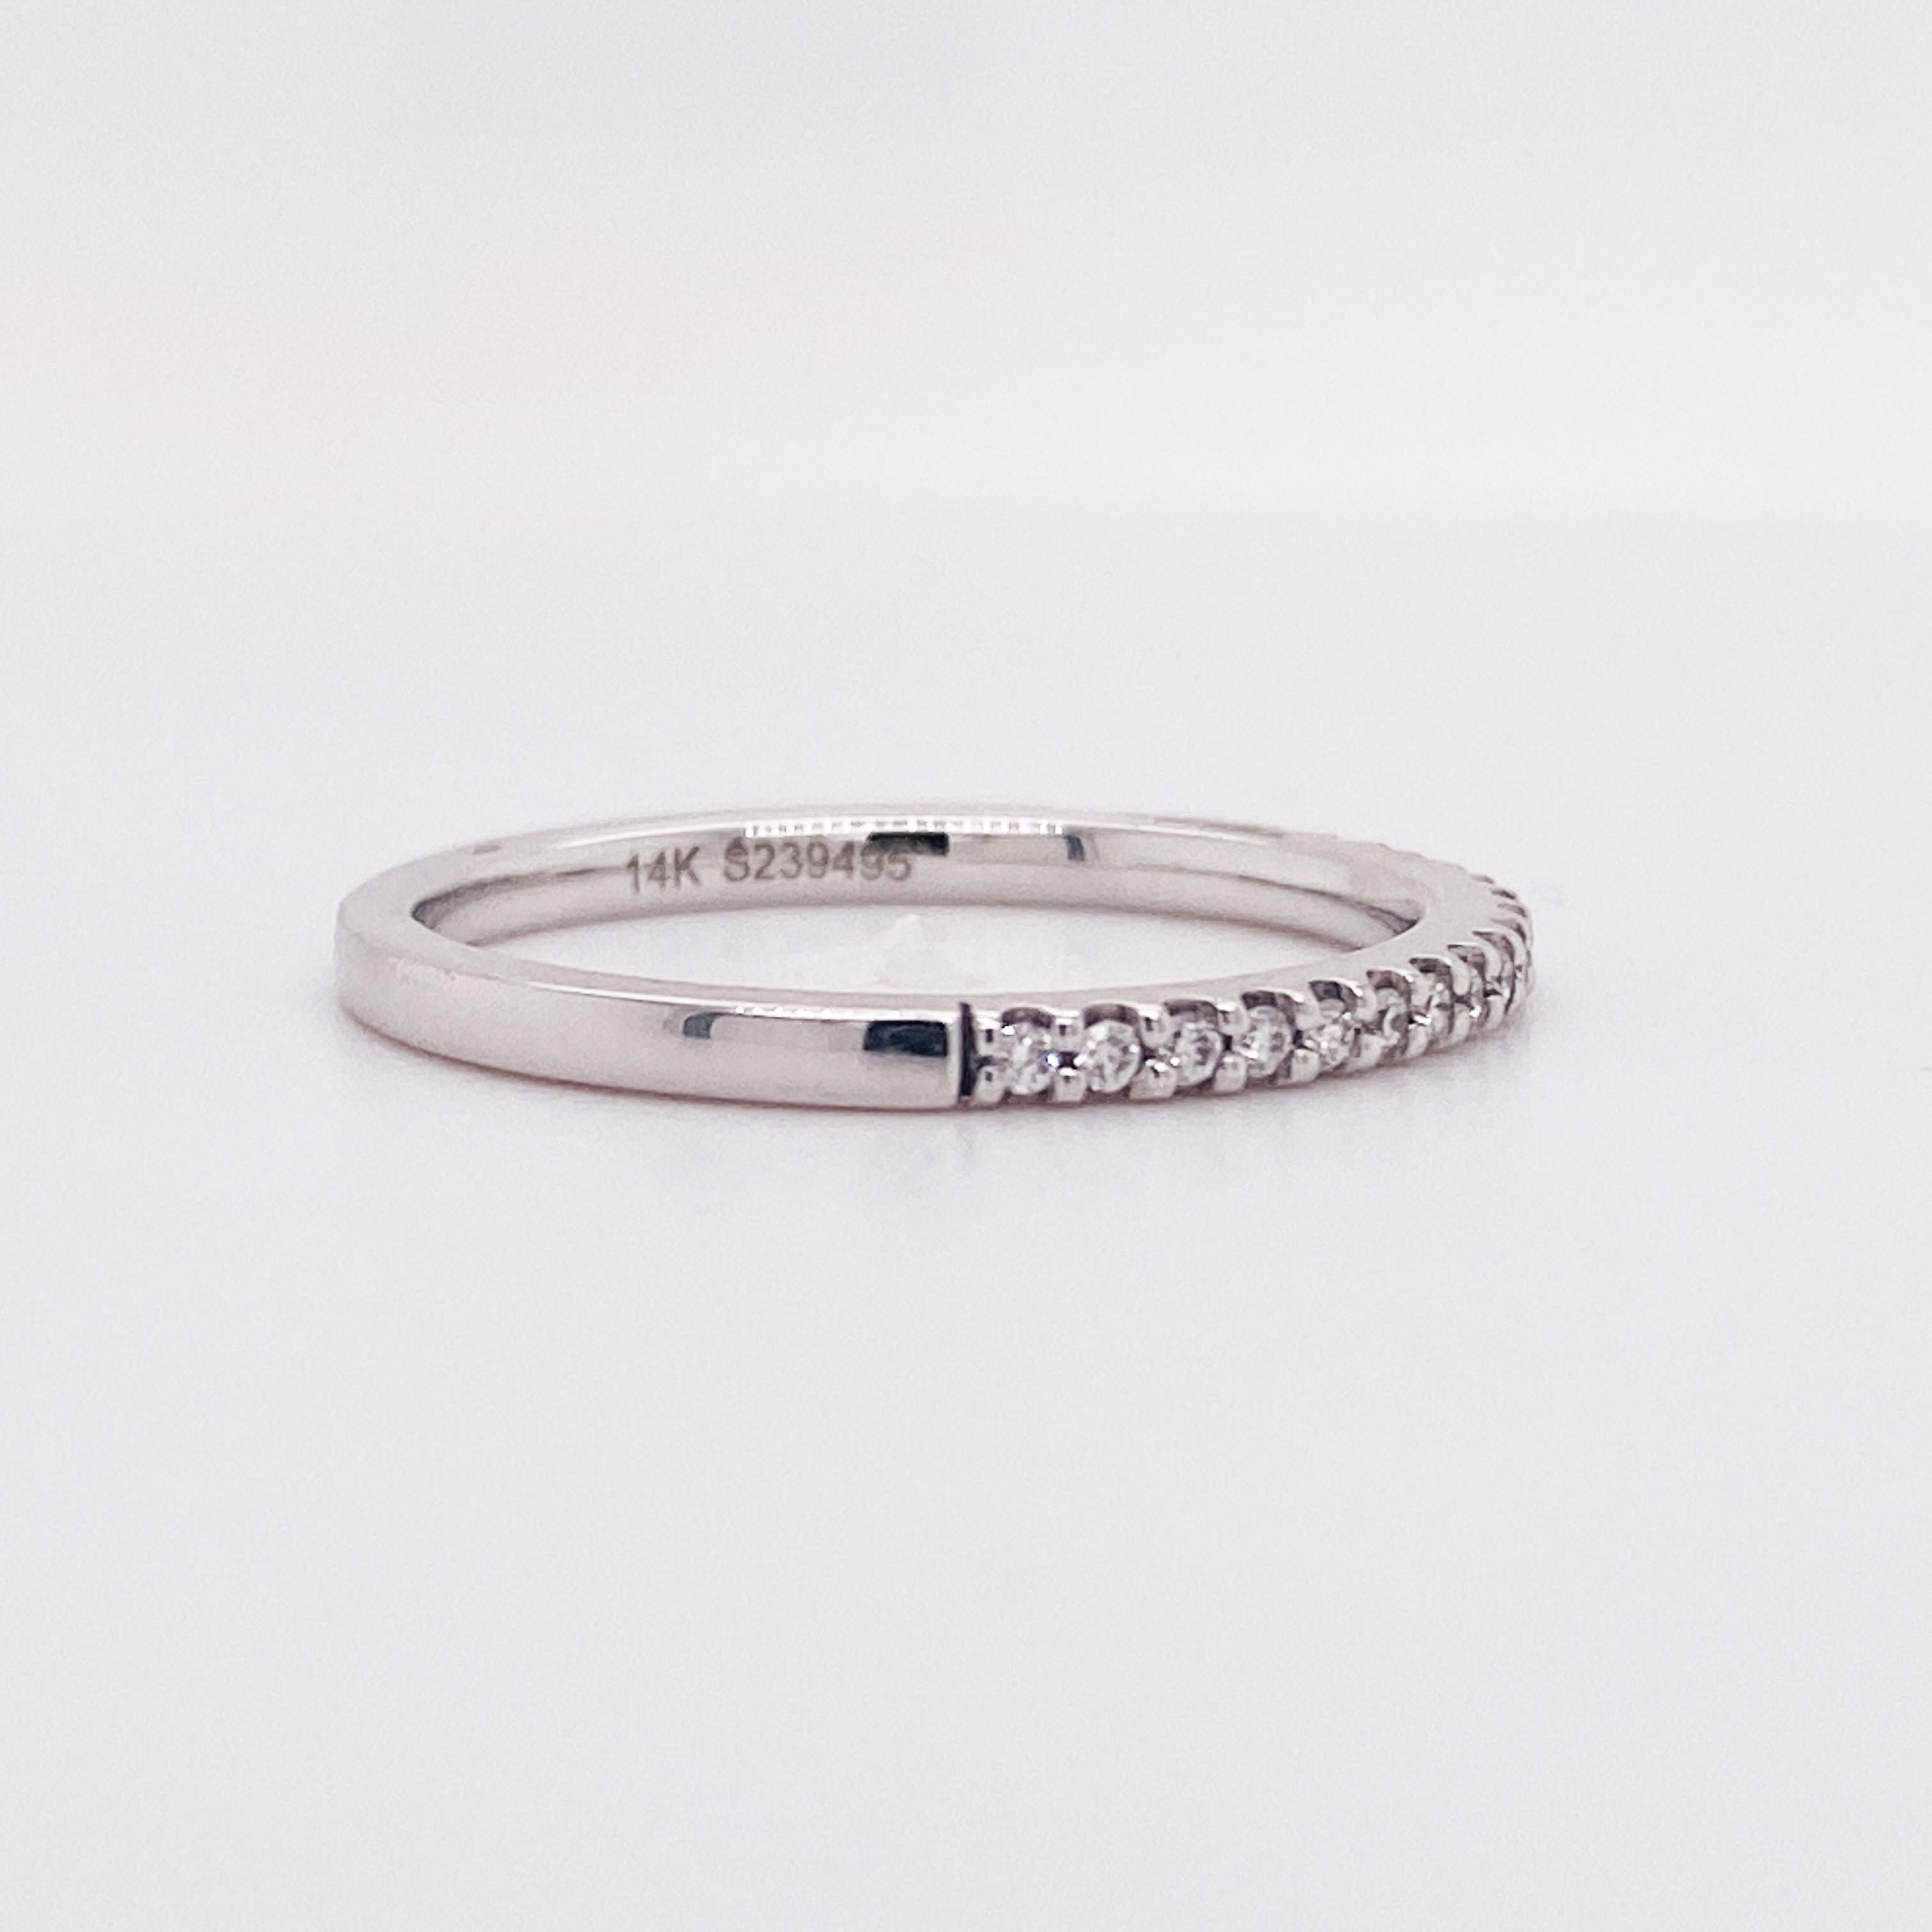 For Sale:  Diamond Half Eternity Band in 14k White Gold .13 Carat Round Diamond Stackable 3